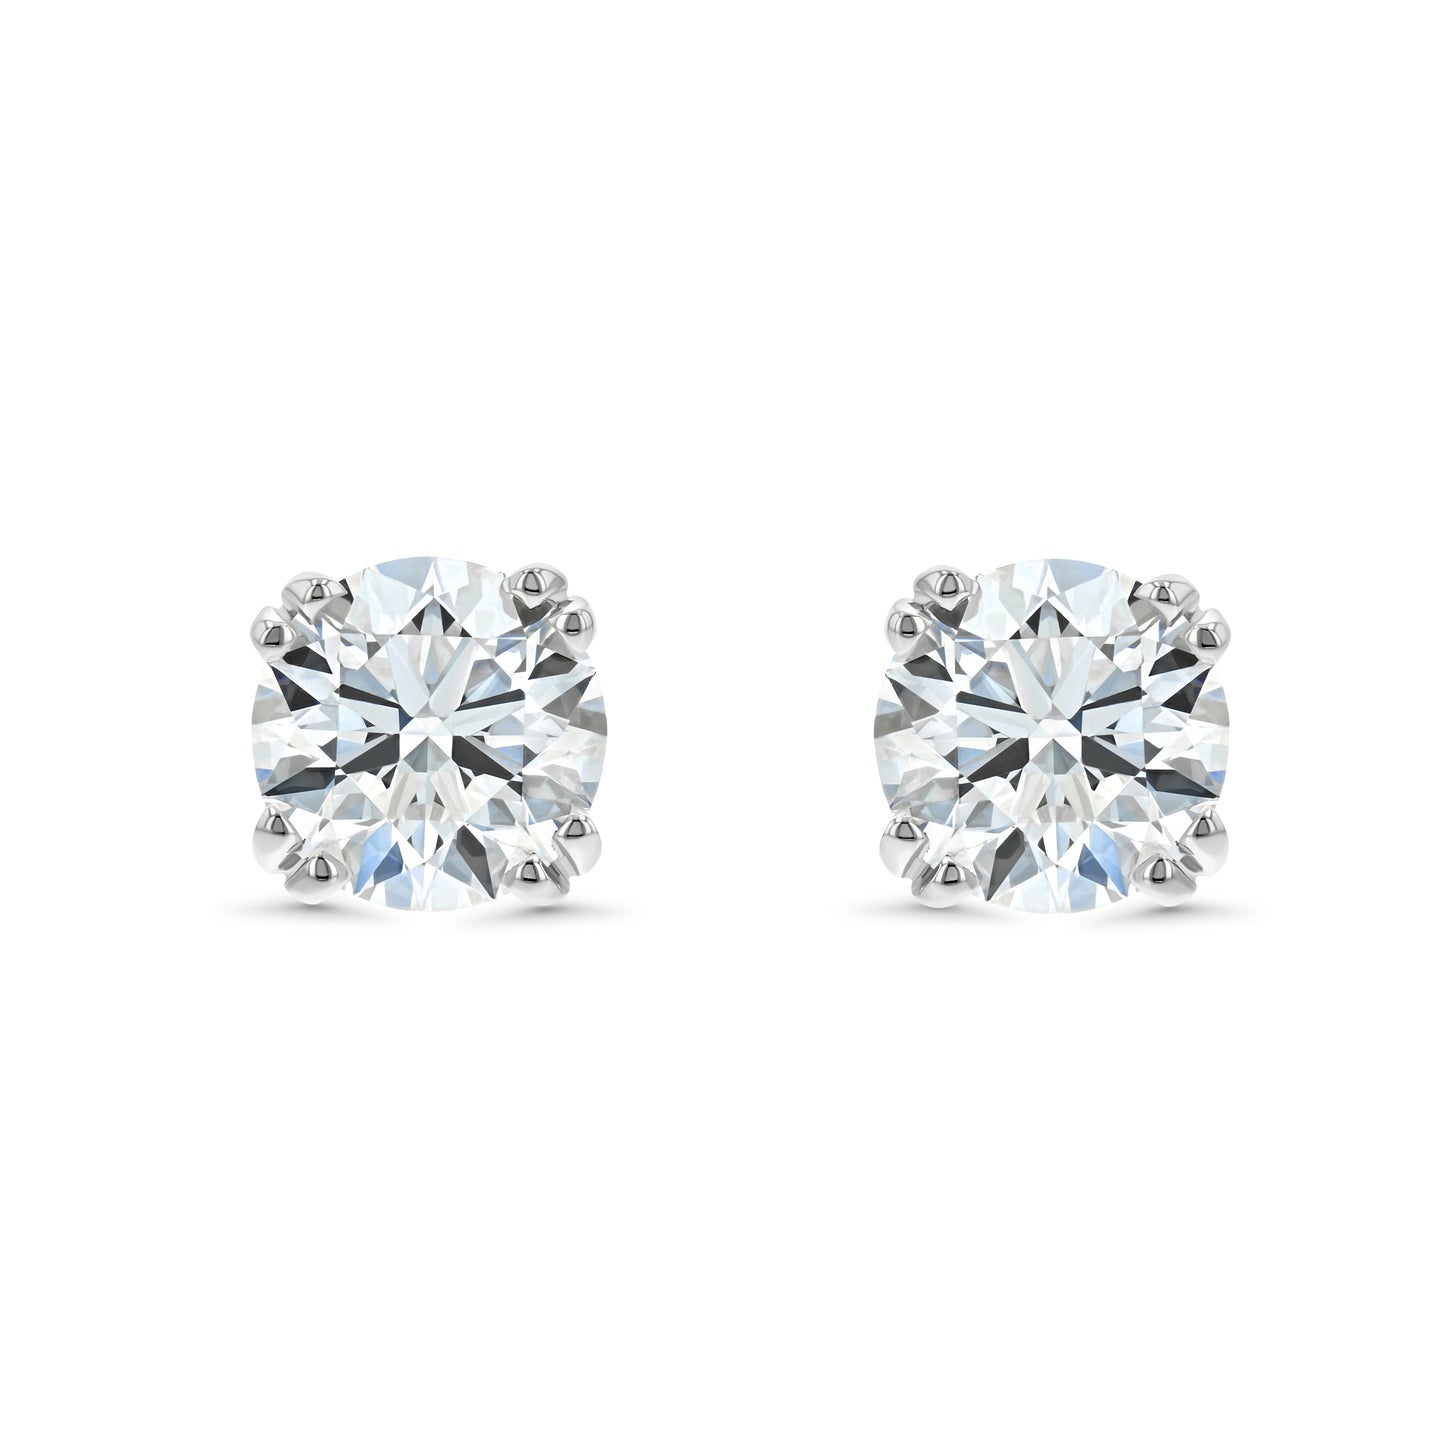 18k White Gold Double Prong Round Diamond Stud Earrings 1ctw (5.2mm Ea), G Color, Si3 Clarity